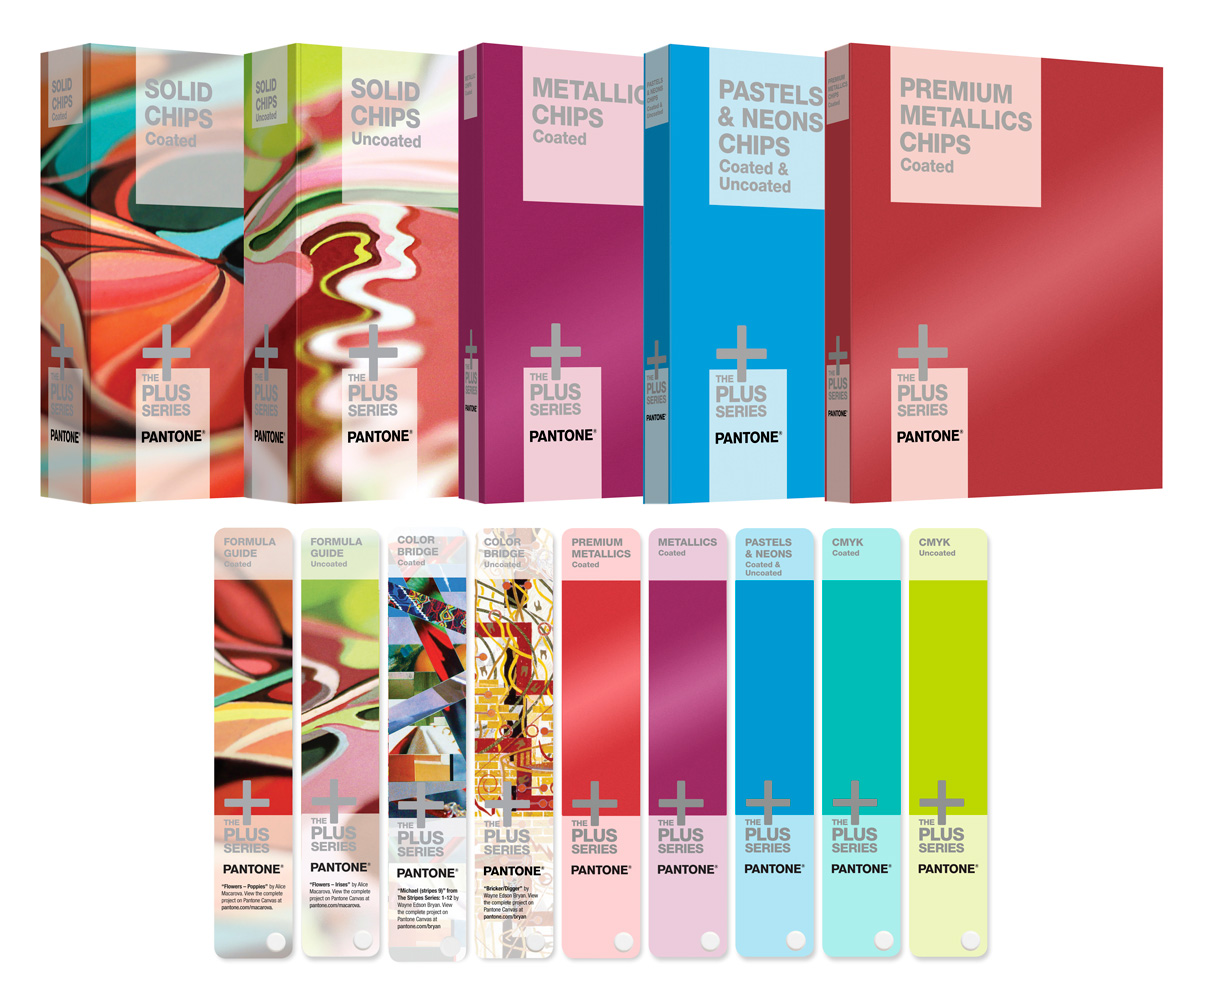 Pantone Reference Library